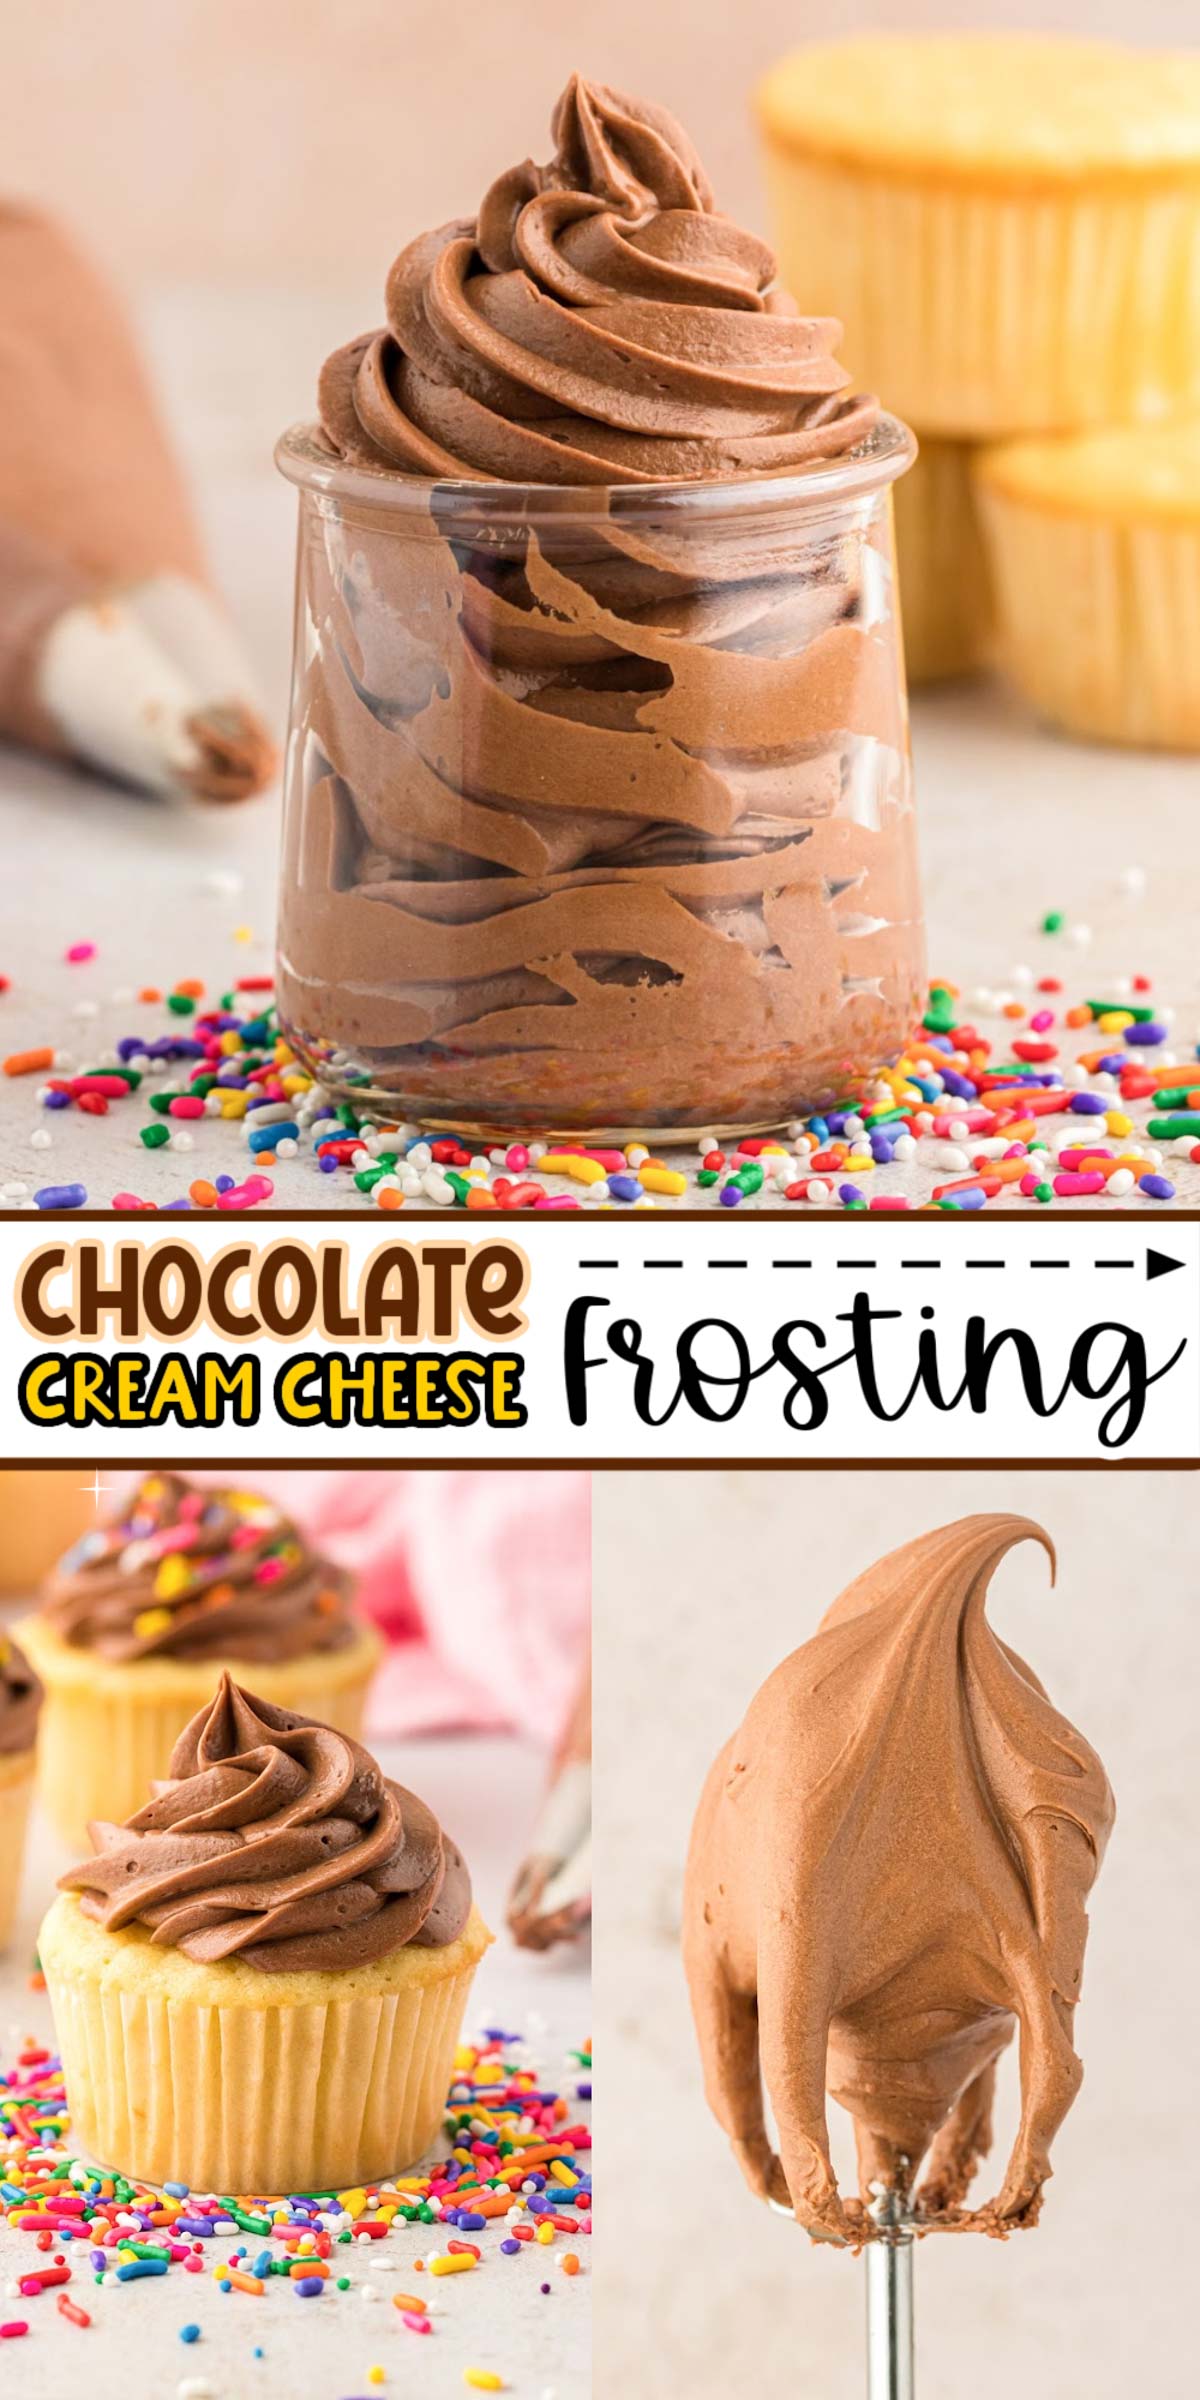 Chocolate Cream Cheese Buttercream Frosting has a dreamy creamy texture with the best chocolate flavoring, made in just 10 minutes! The perfect choice to use on all of your favorite cakes and cupcakes! via @sugarandsoulco